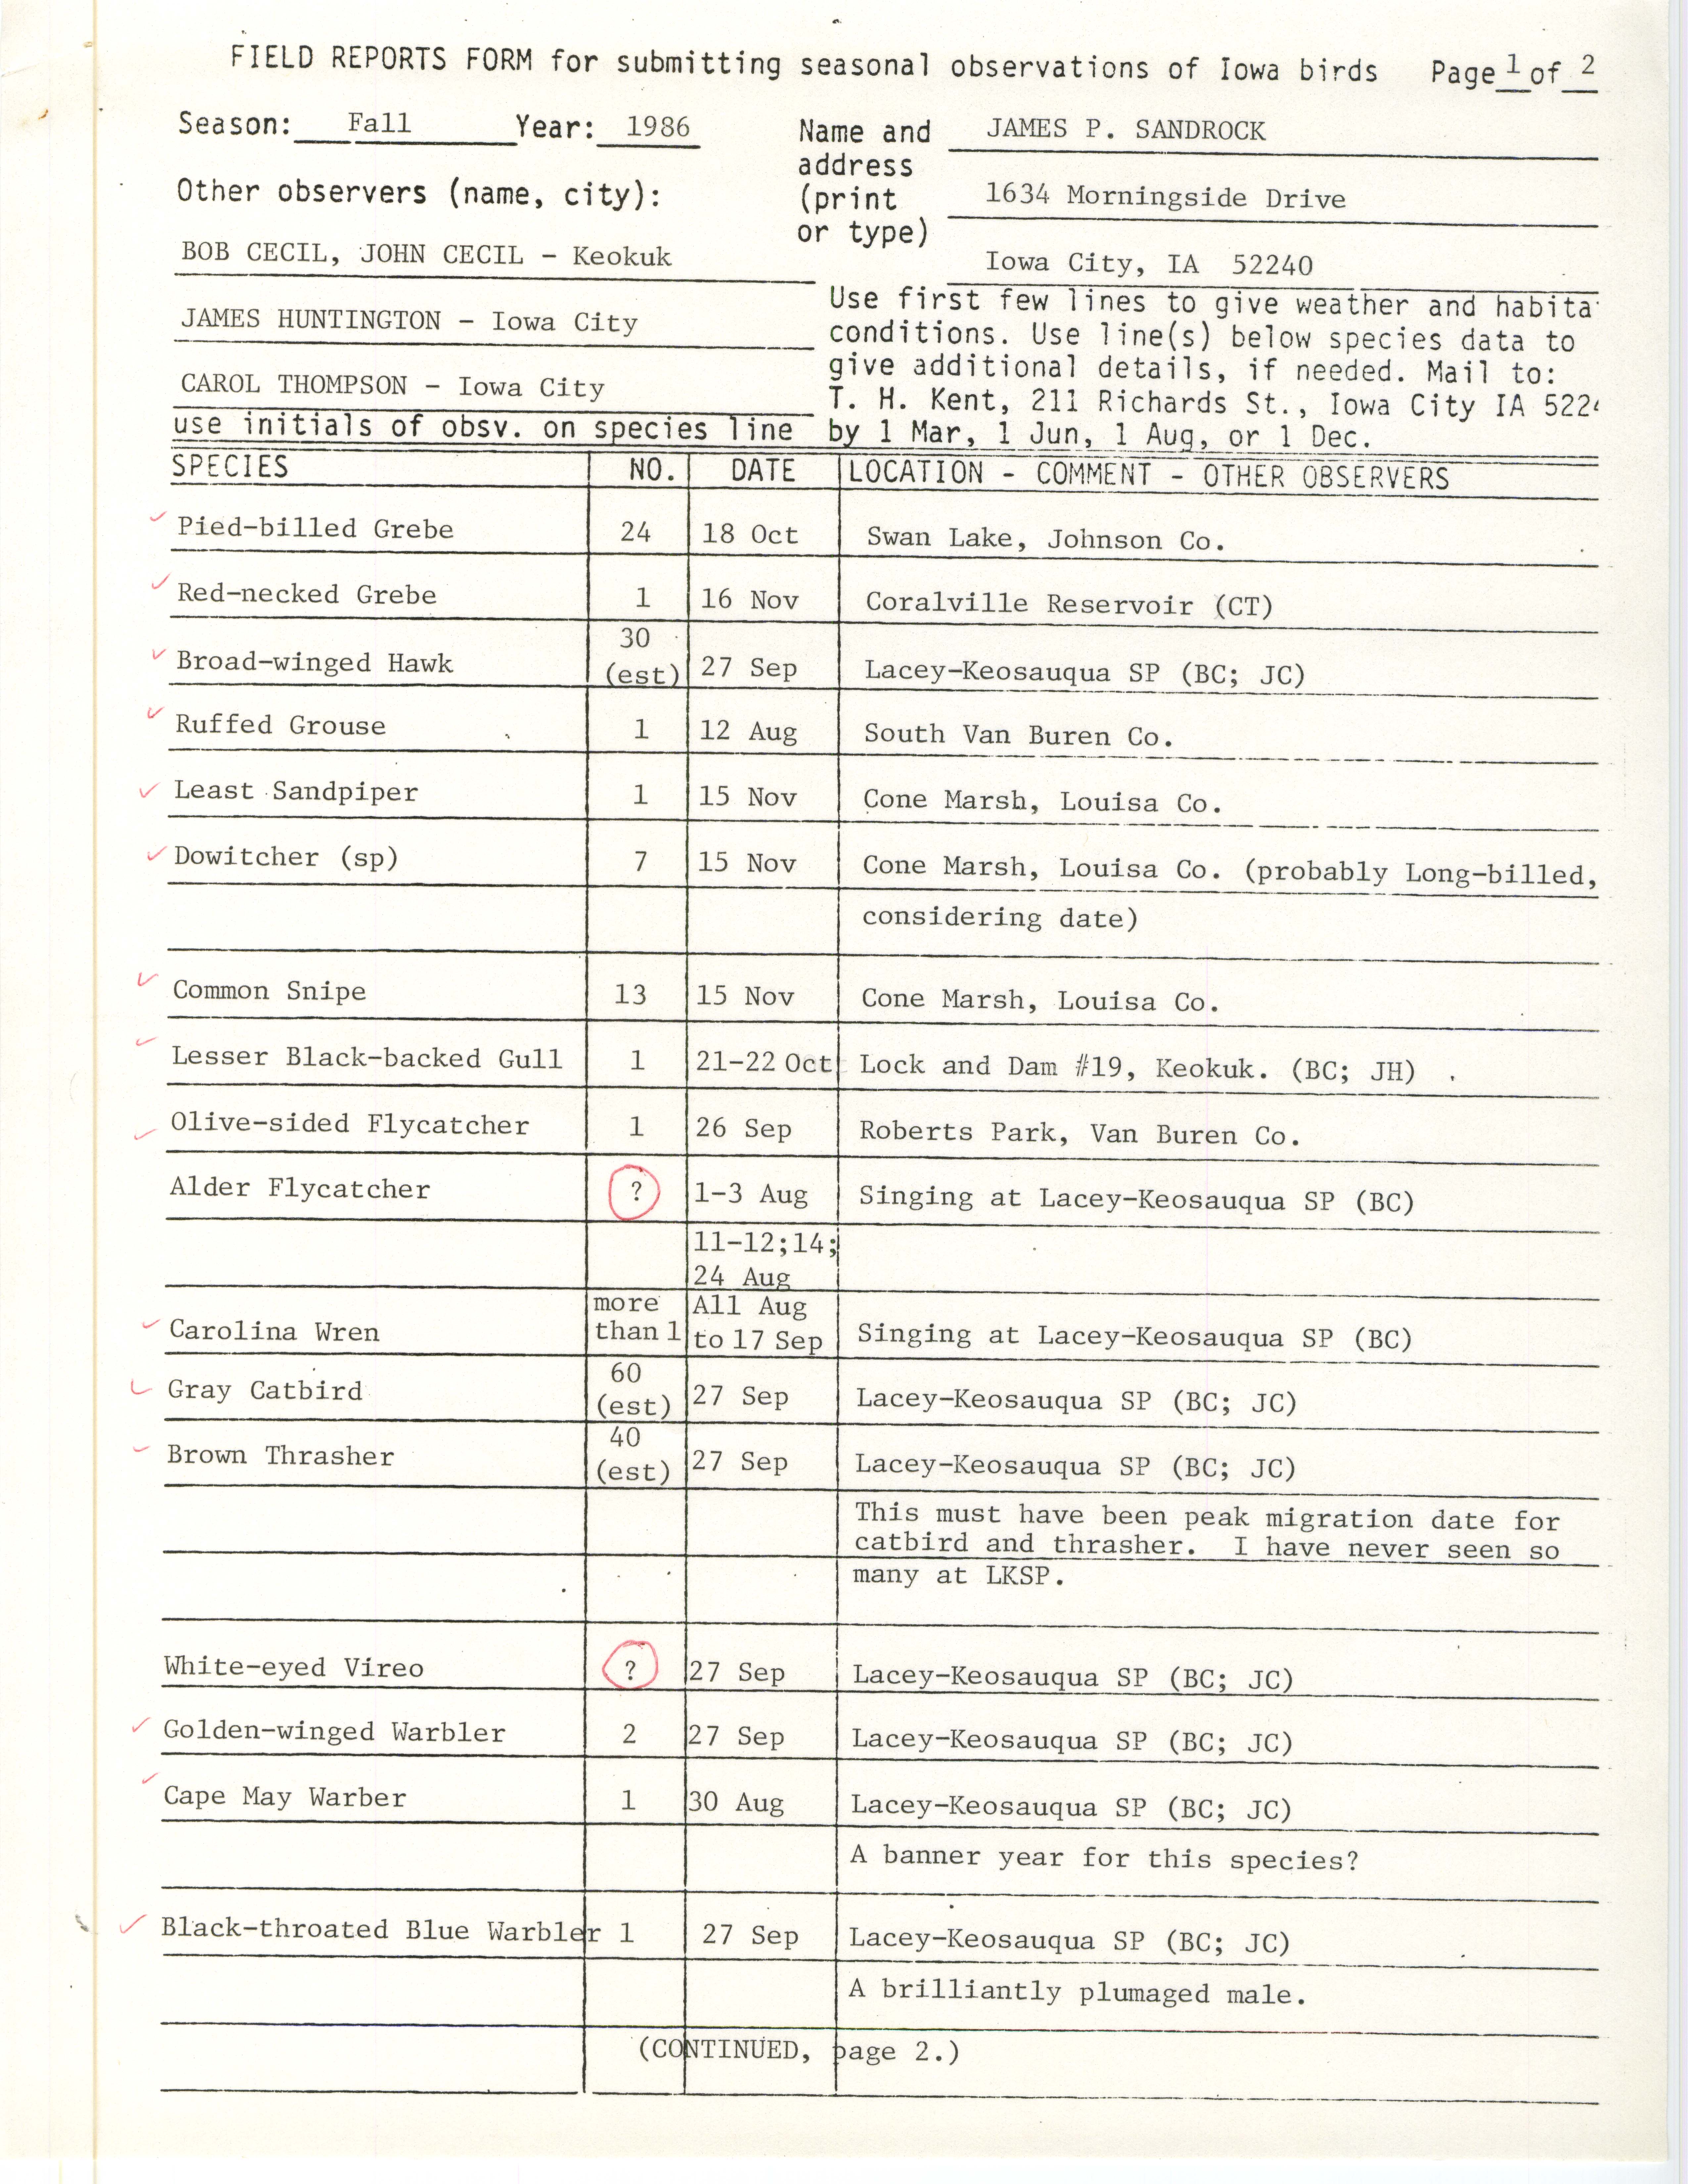 Field reports form for submitting seasonal observations of Iowa birds, James P. Sandrock, fall 1986